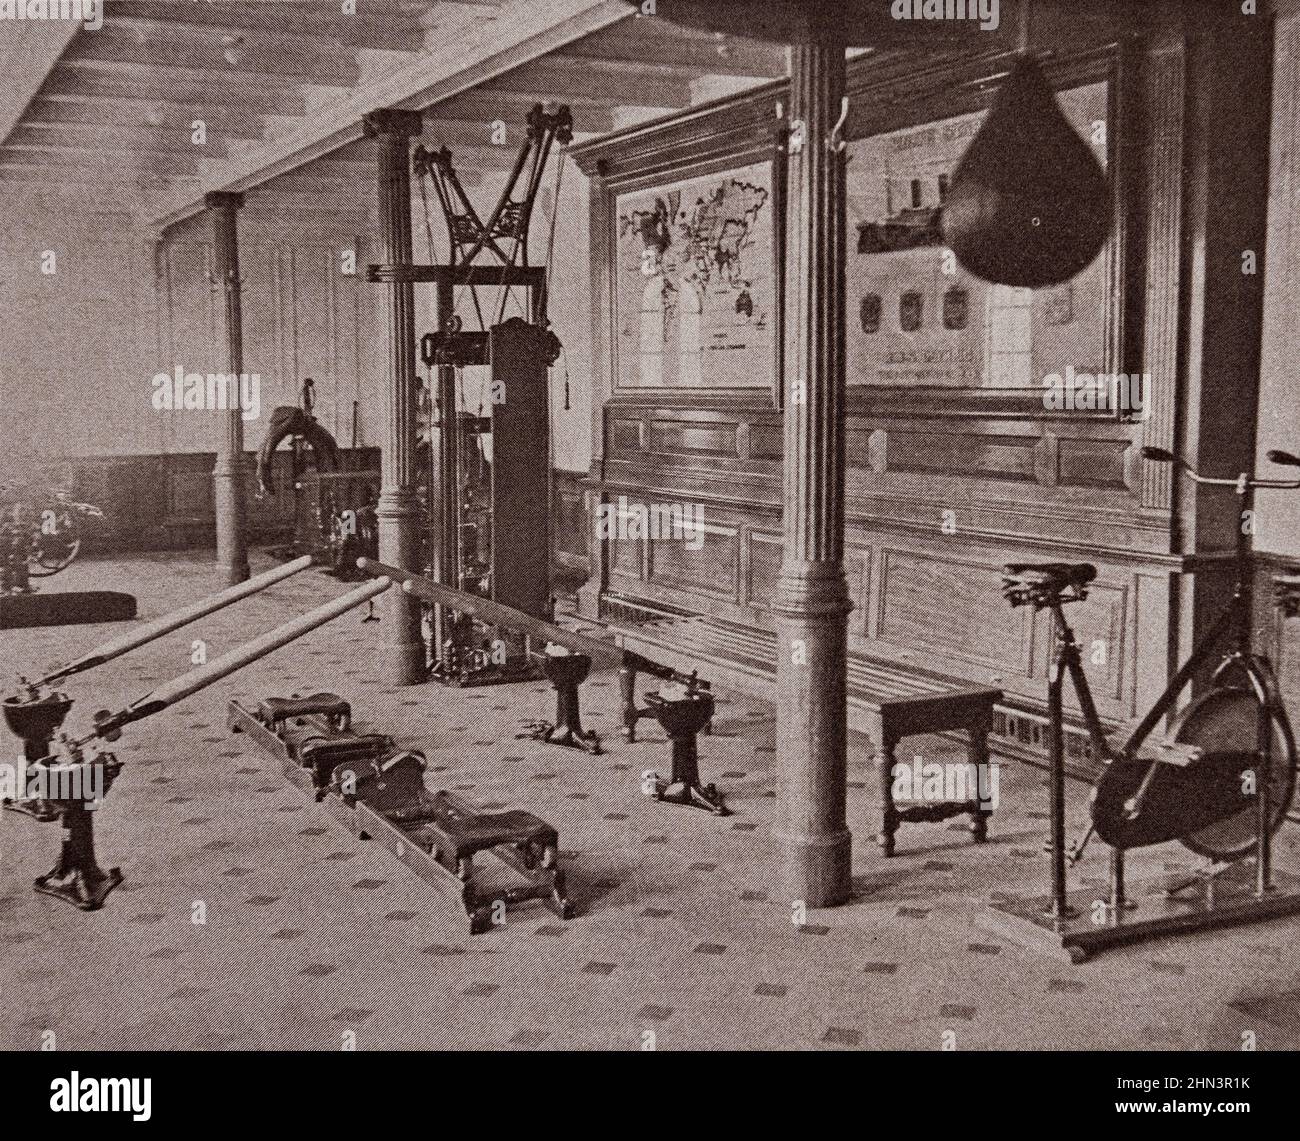 Vintage photo of Titanic liner's interior: The gym and physical exercises. 1912 Could notice, on the floor, the boating simulator with its spring oars Stock Photo